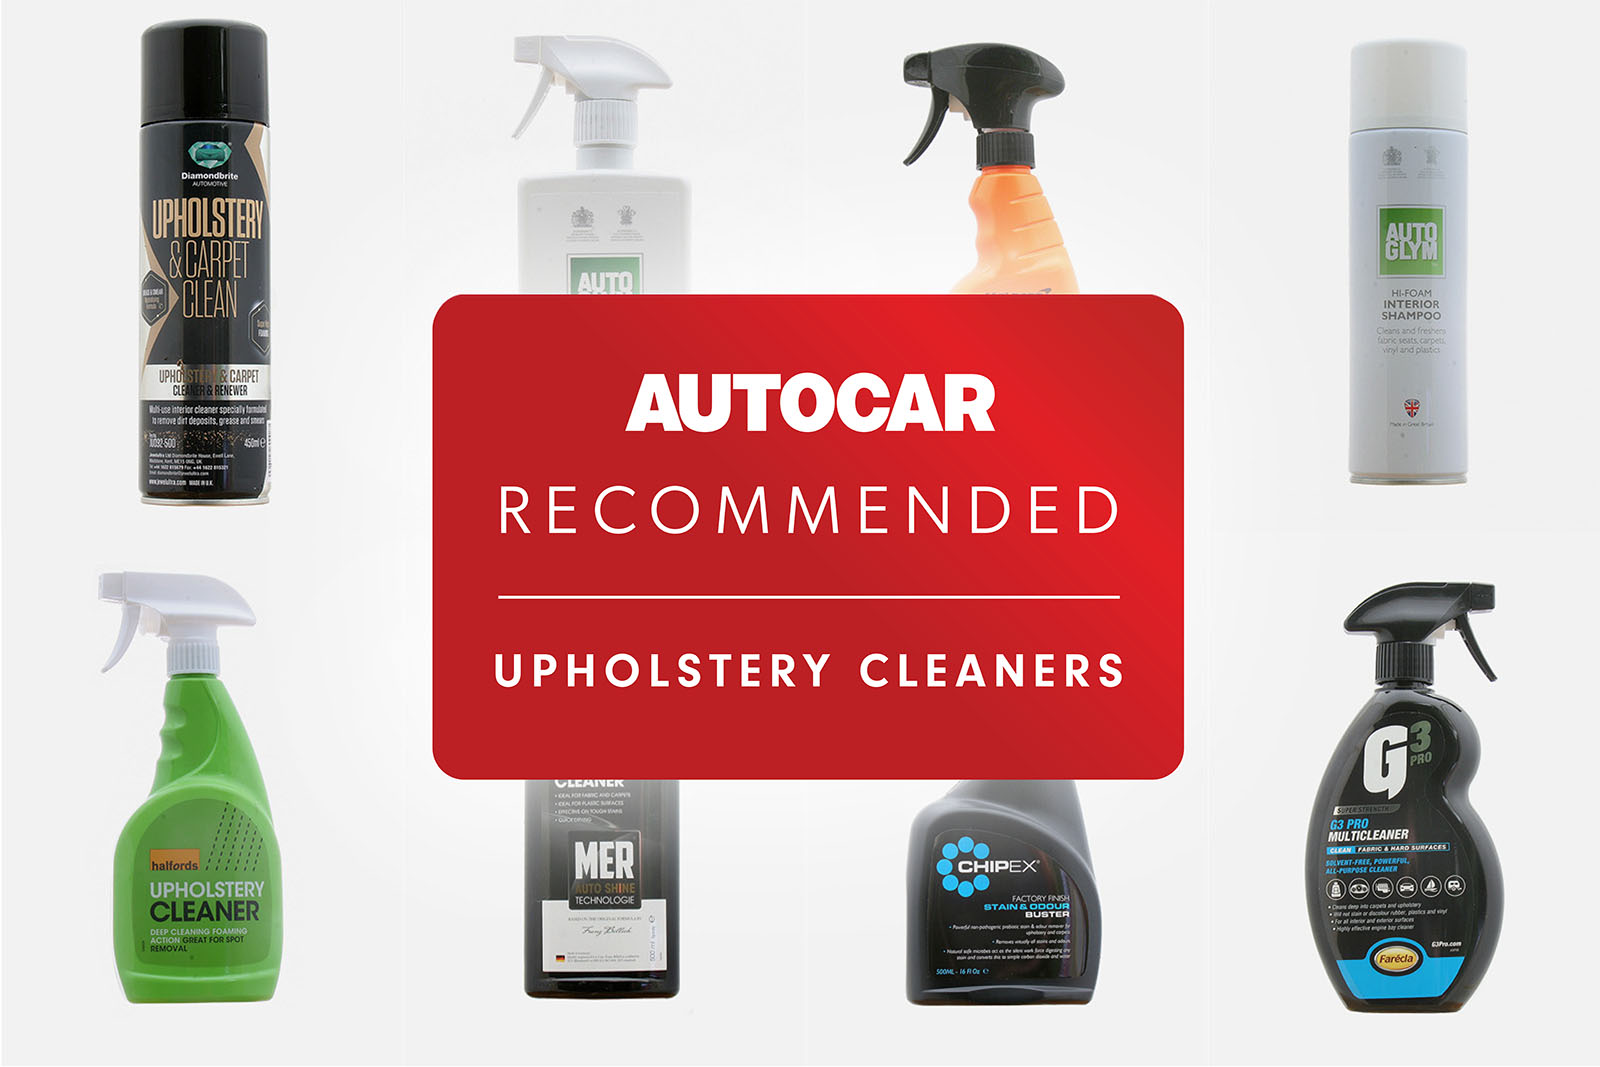 Autocar product test: Which upholstery cleaner is best?